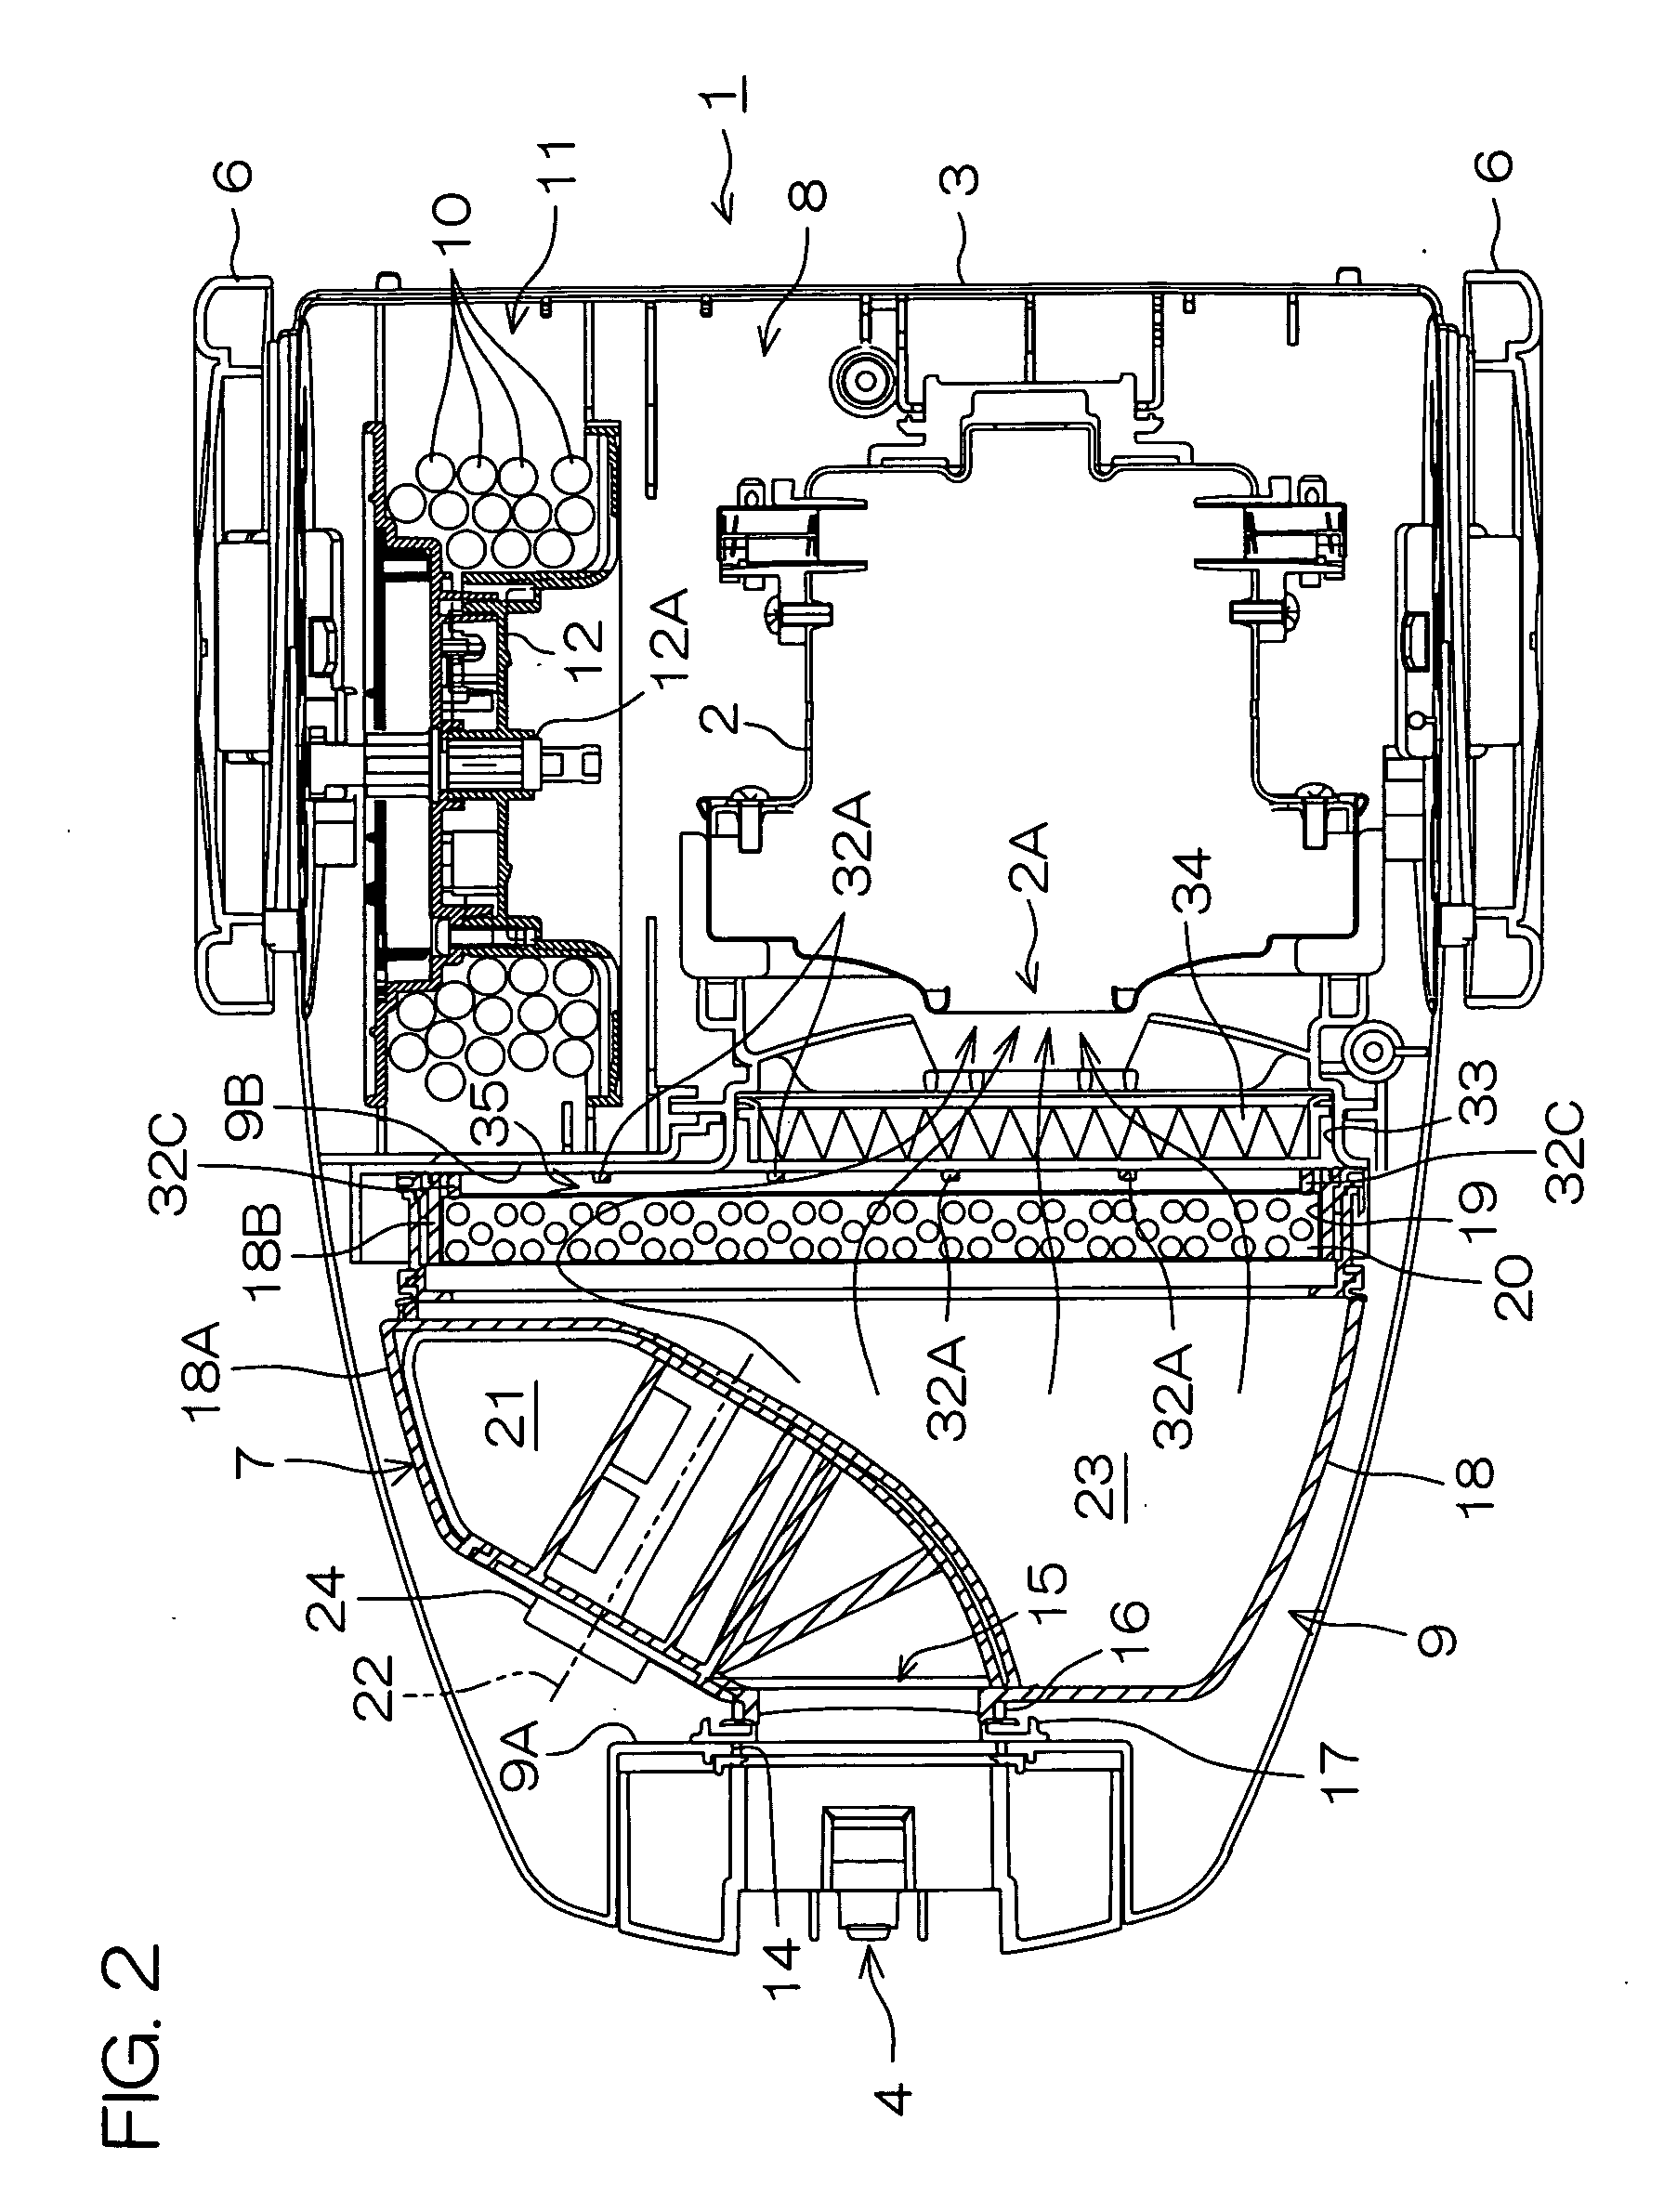 Electric vacuum cleaner and cyclonic dust collecting apparatus